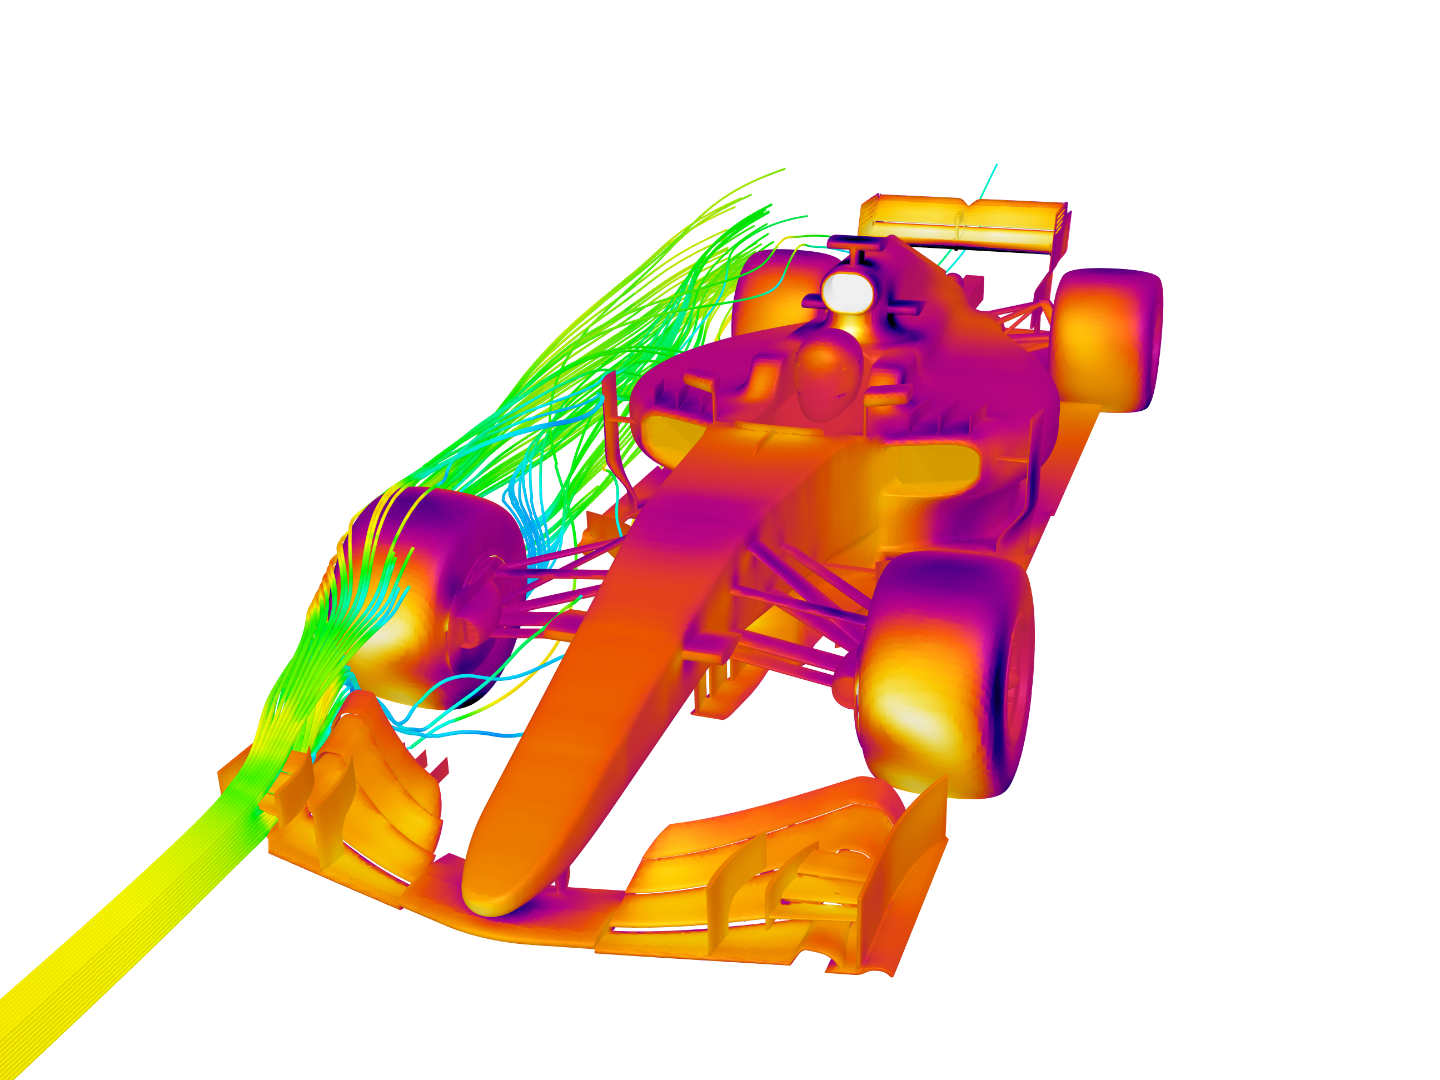 Steady State Incompressible F1 Aero Analysis image